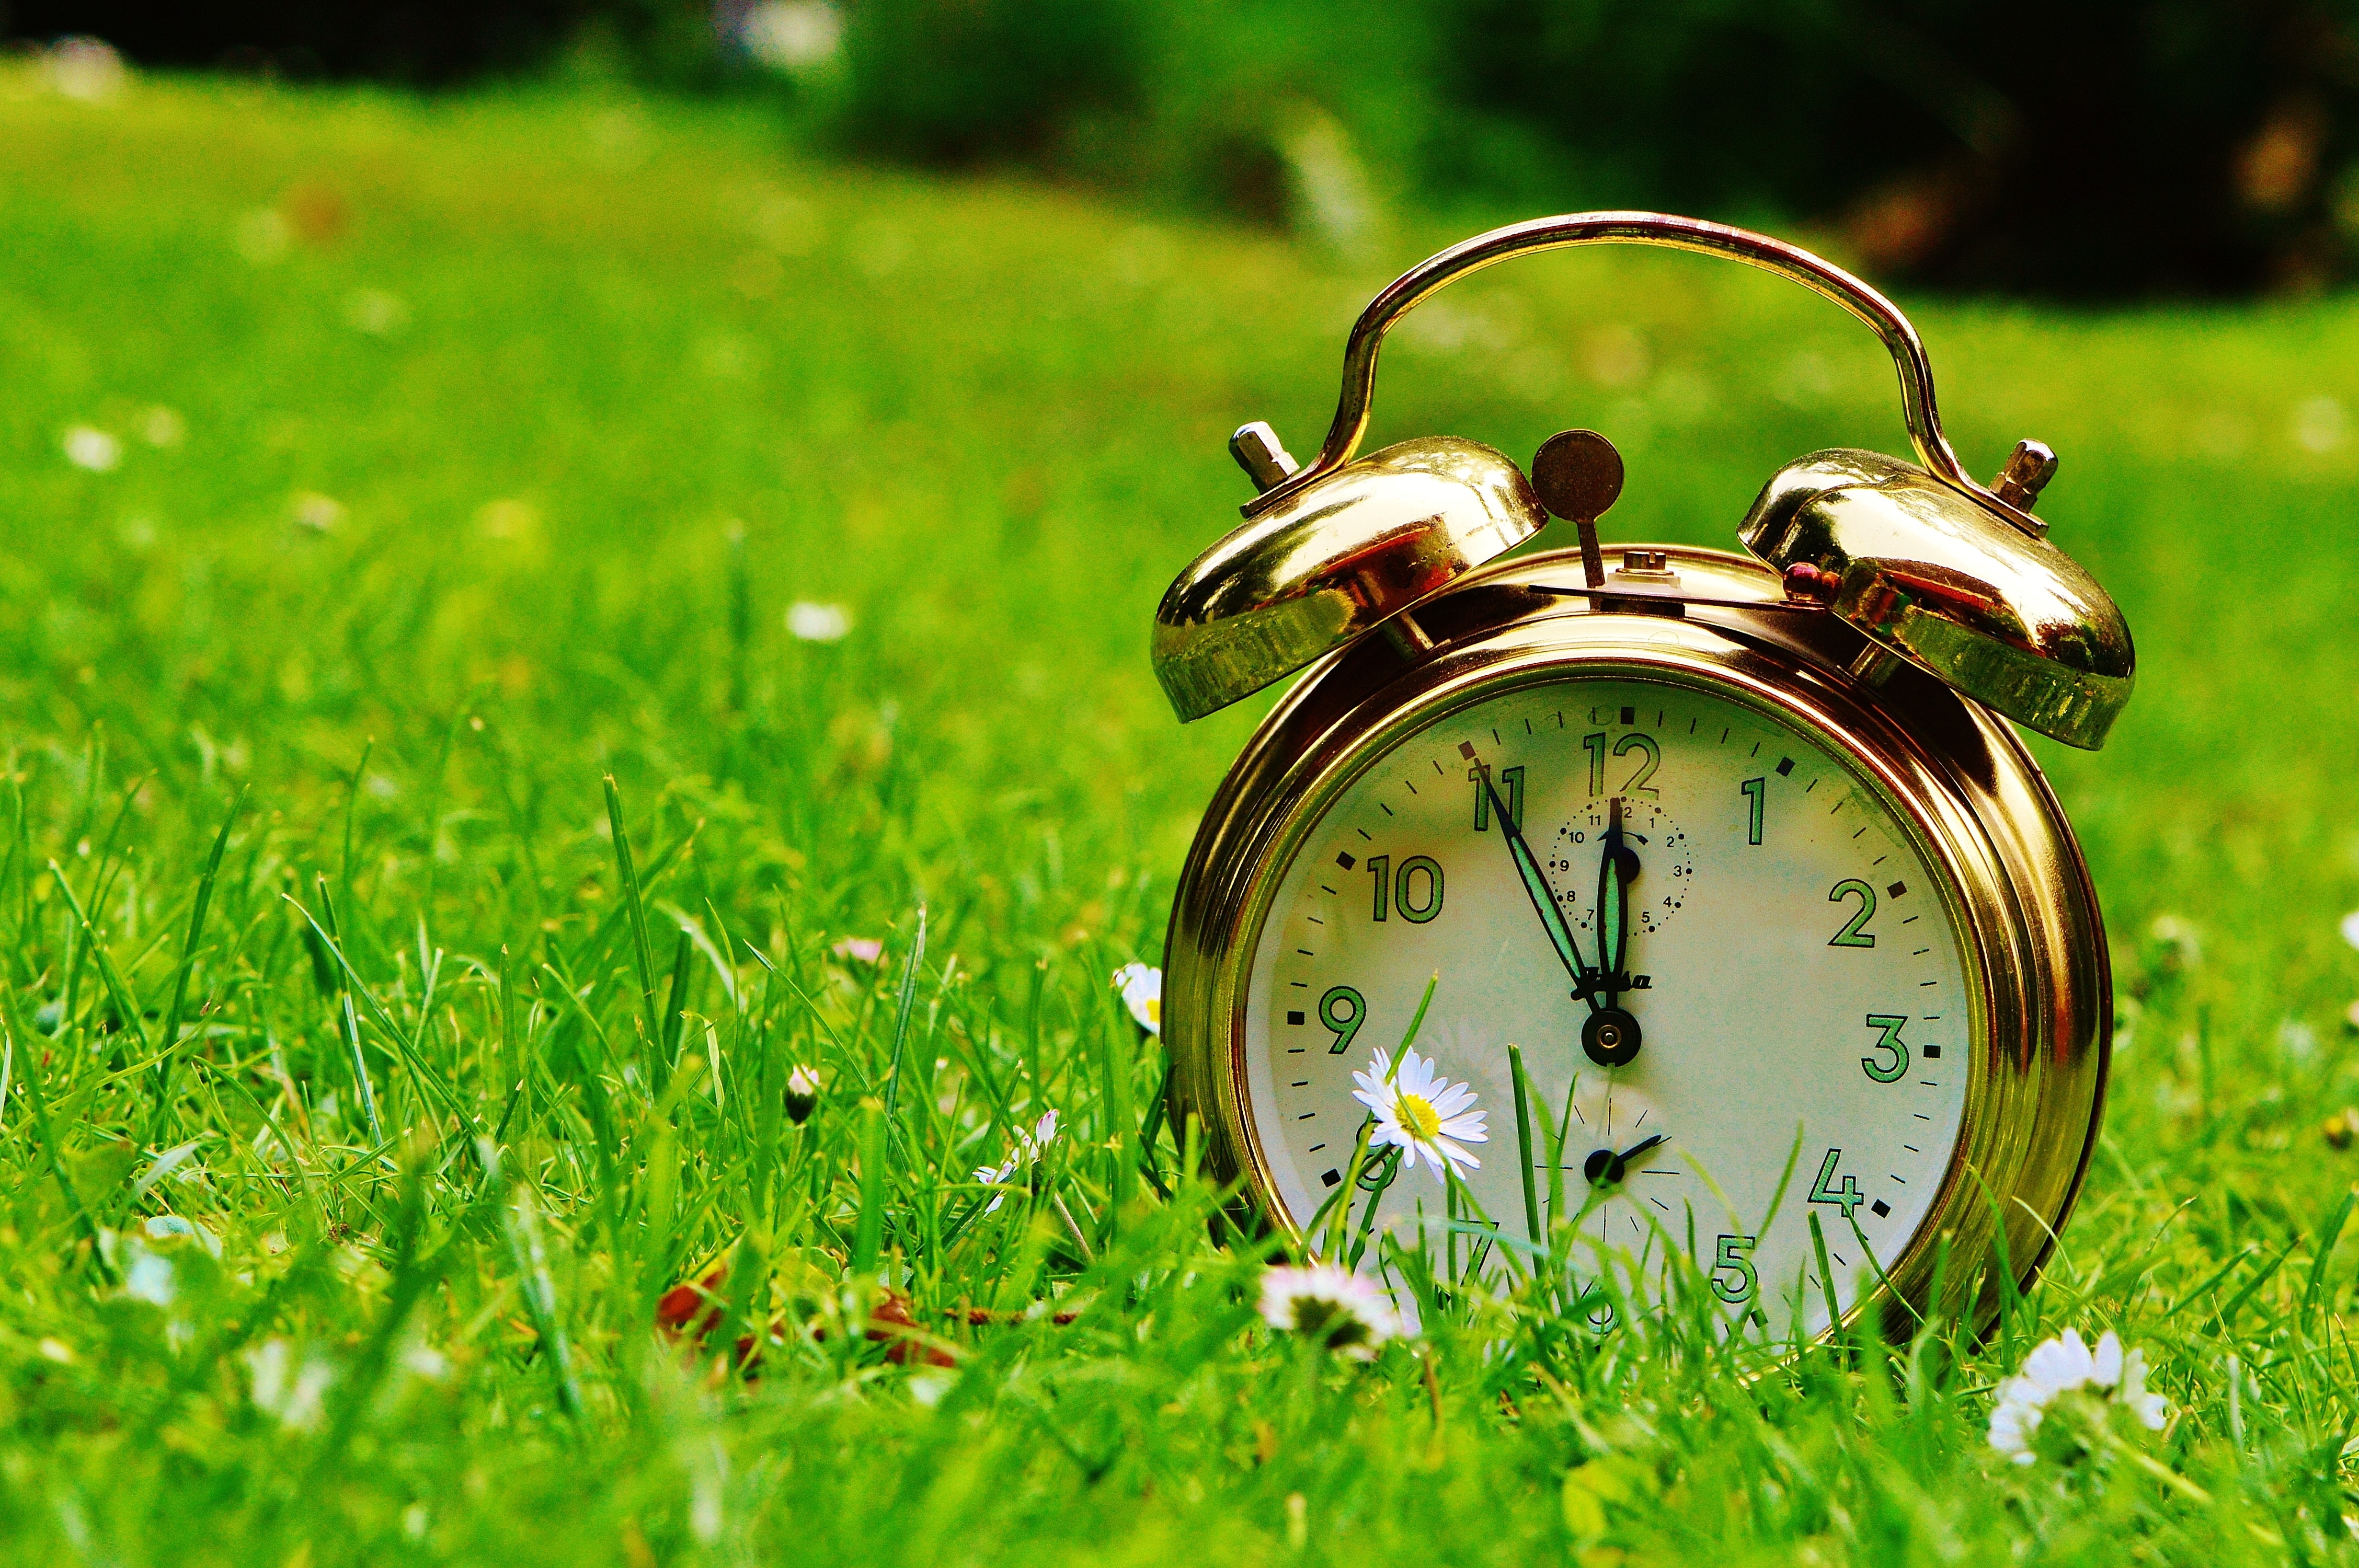 The Eleventh Hour, Disaster, Alarm Clock, grass, time